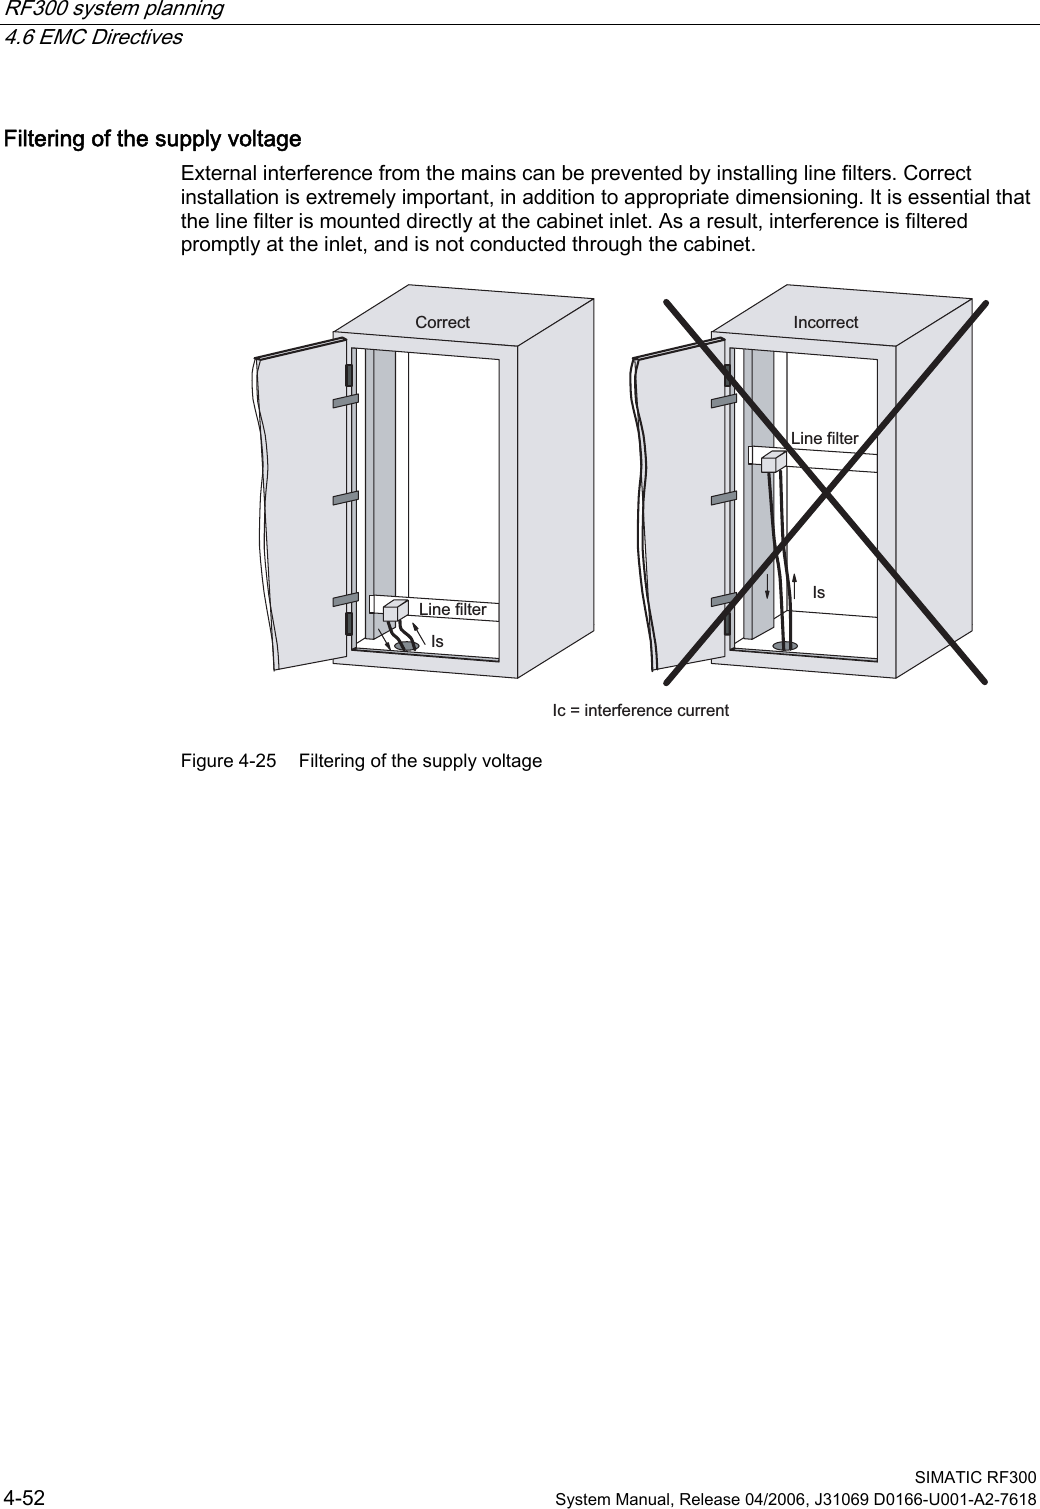 RF300 system planning   4.6 EMC Directives  SIMATIC RF300 4-52  System Manual, Release 04/2006, J31069 D0166-U001-A2-7618 Filtering of the supply voltage External interference from the mains can be prevented by installing line filters. Correct installation is extremely important, in addition to appropriate dimensioning. It is essential that the line filter is mounted directly at the cabinet inlet. As a result, interference is filtered promptly at the inlet, and is not conducted through the cabinet. /LQHILOWHU,V&amp;RUUHFW/LQHILOWHU,QFRUUHFW,F LQWHUIHUHQFHFXUUHQW,V Figure 4-25  Filtering of the supply voltage  